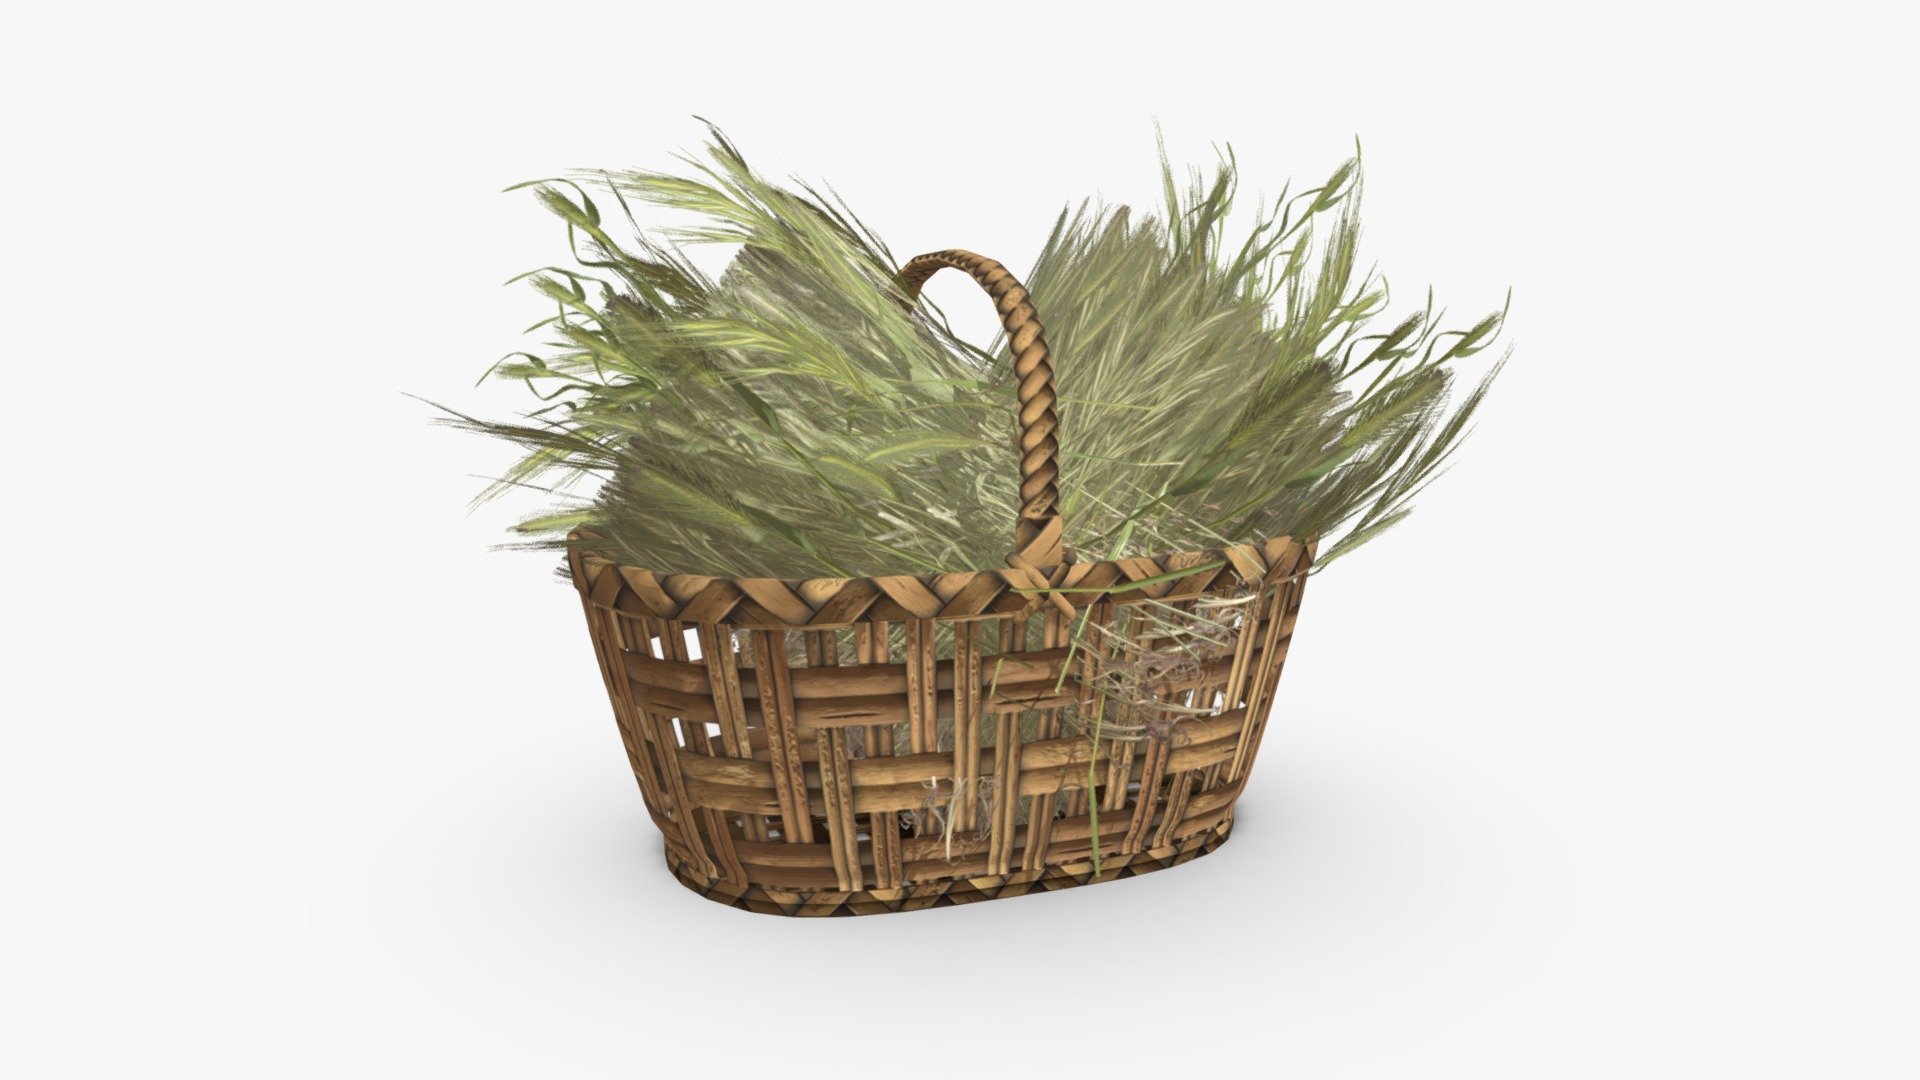 Check out my website for more products and better deals! &amp;gt;&amp;gt; SM5 by Heledahn &amp;lt;&amp;lt;

This is a digital 3d model of two rolls of Harvested Barley in a Wicker Basket. The basket is very rough and big, perfect to hold the harvested goods, and the barley bulrush tied in two messy rolls.

This model can be used for any Medieval/Fantasy themed render project, used either as a background prop, or as a closeup prop due to its high detail and visual quality.

This product will achieve realistic results in your rendering projects and animations, being greatly suited for close-ups due to their high quality topology and PBR shading 3d model